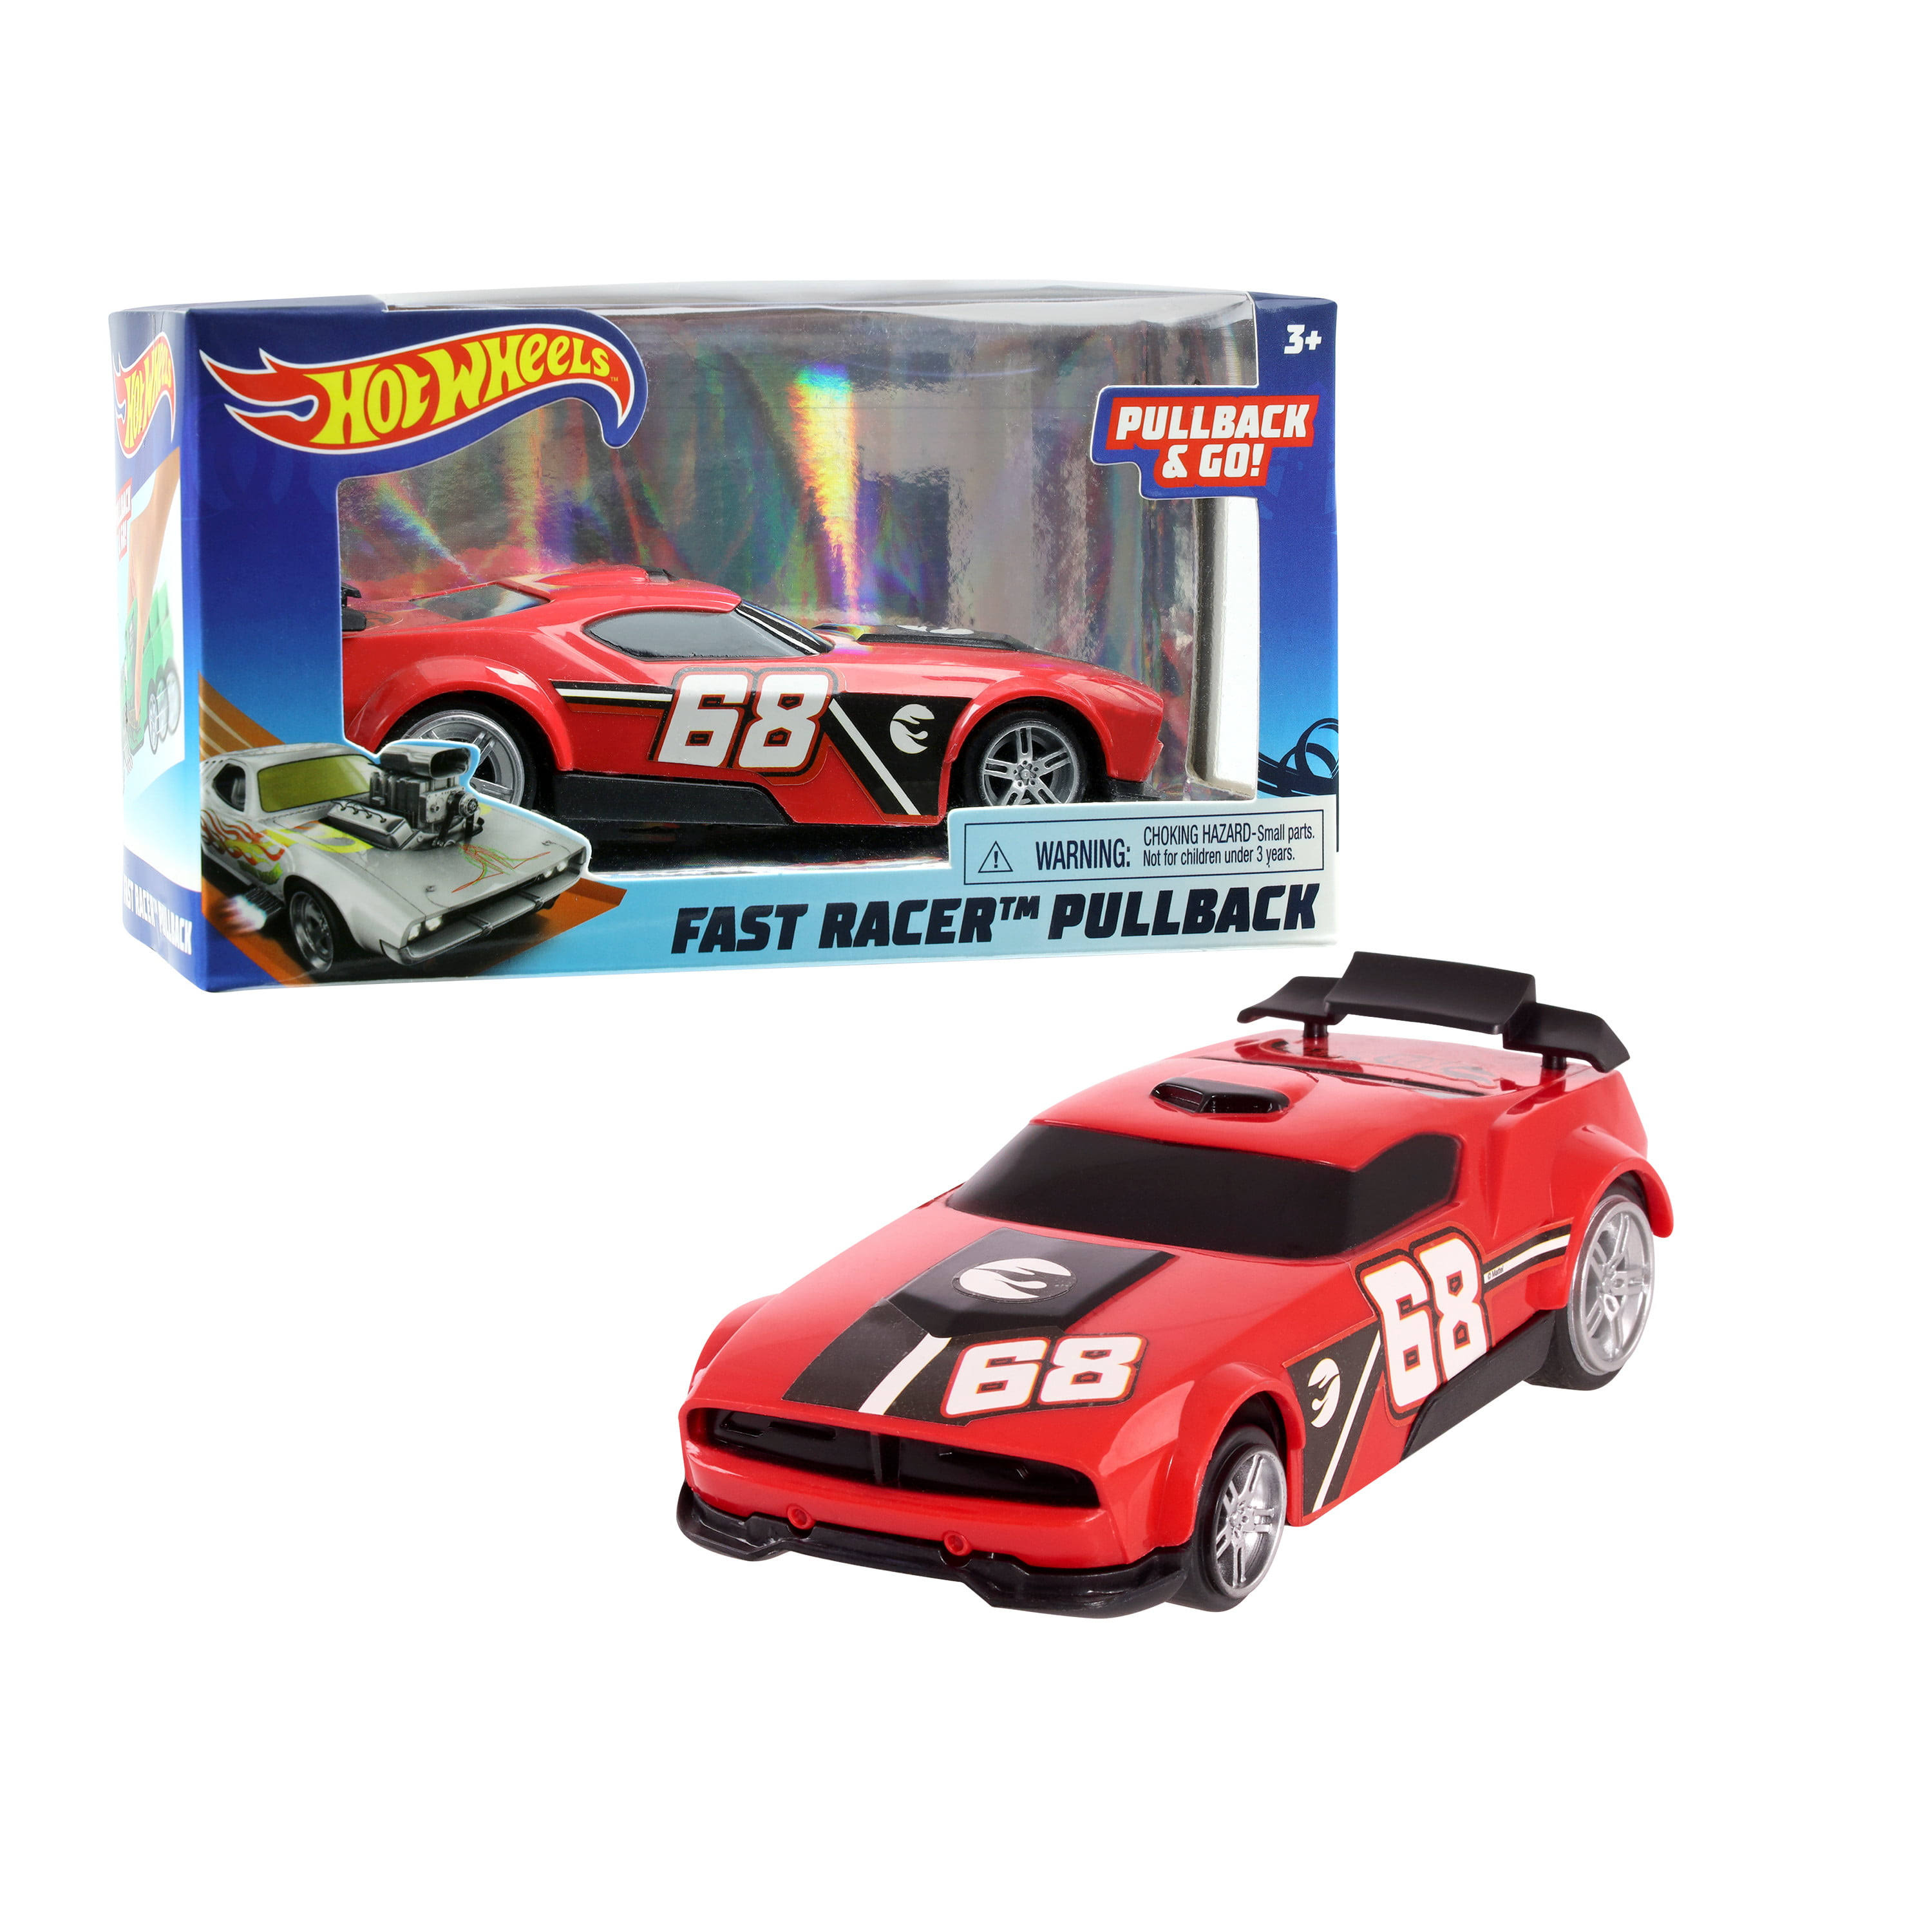 Hot Wheels Fast Racer Pullback (2020) Just Play Red Fast Fish Toy Car